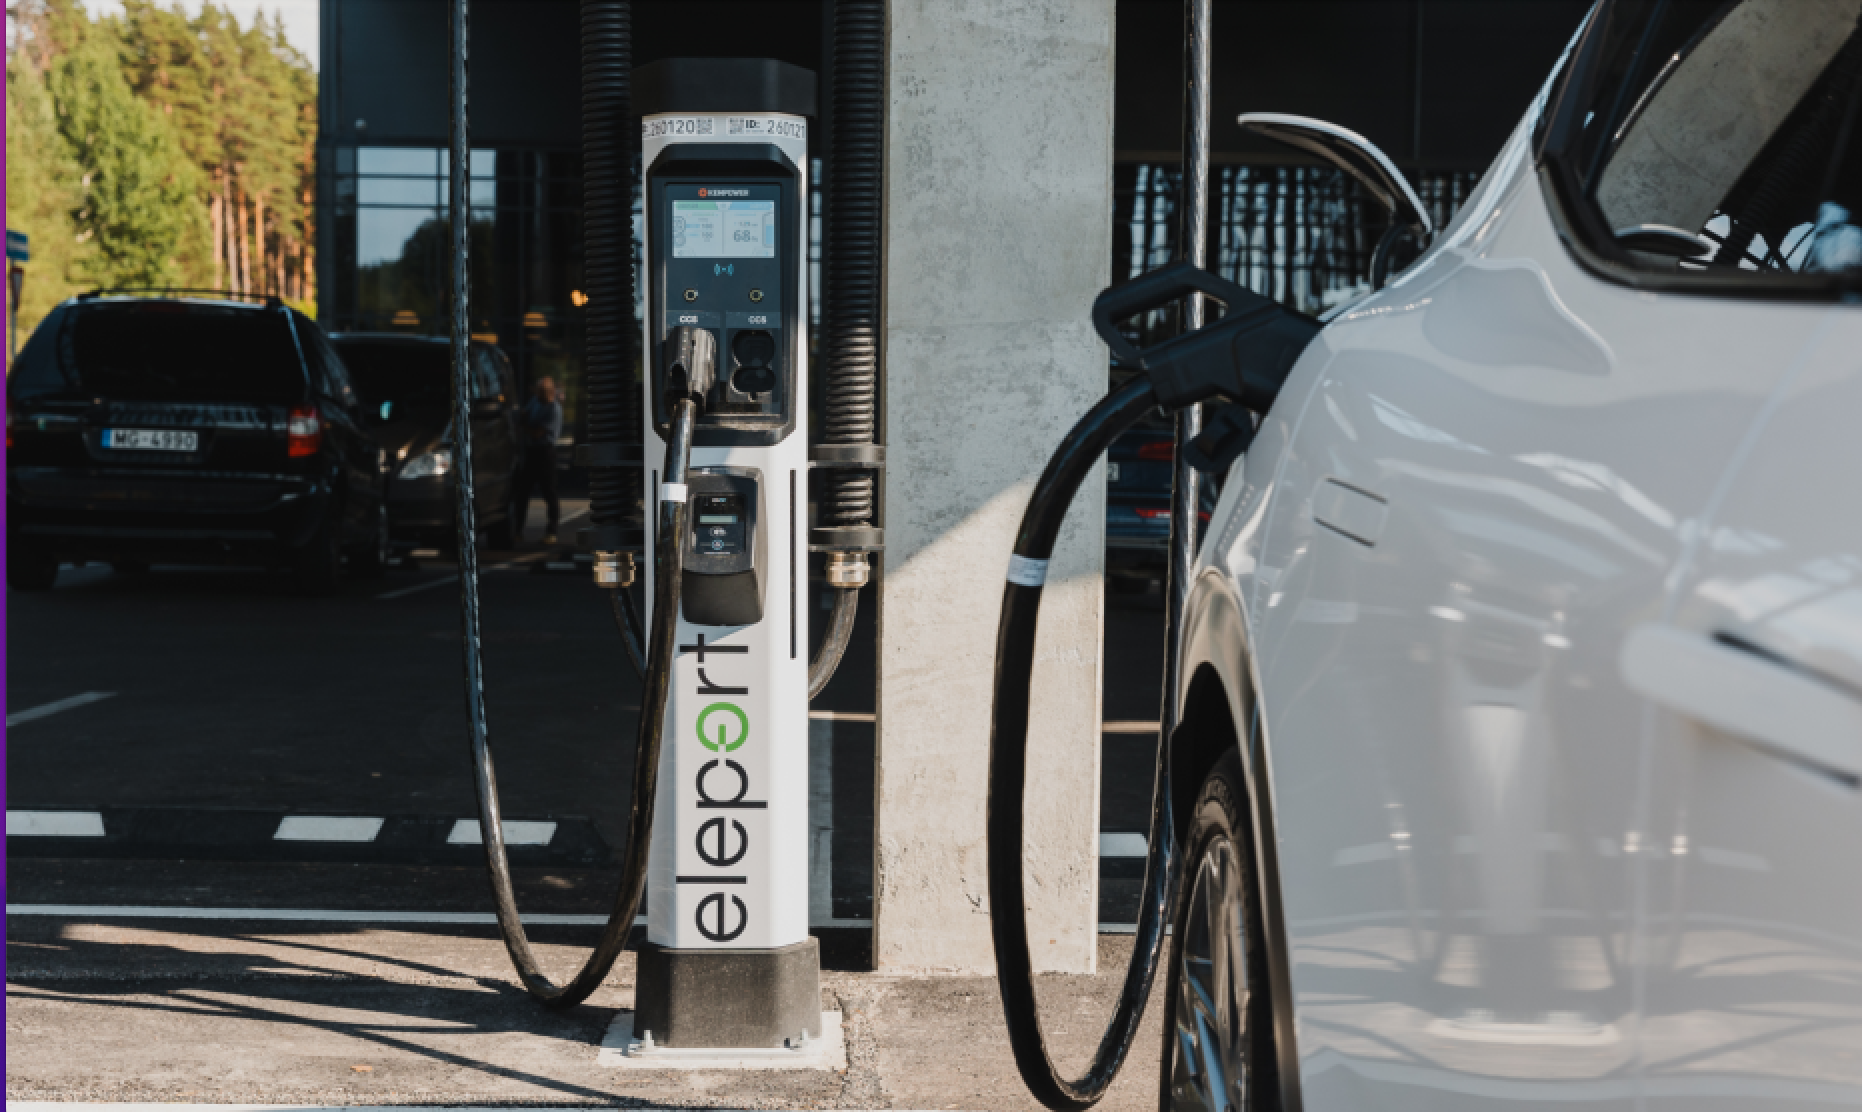 Eleport announces the locations where they will install EV charging stations in Lithuania’s major cities